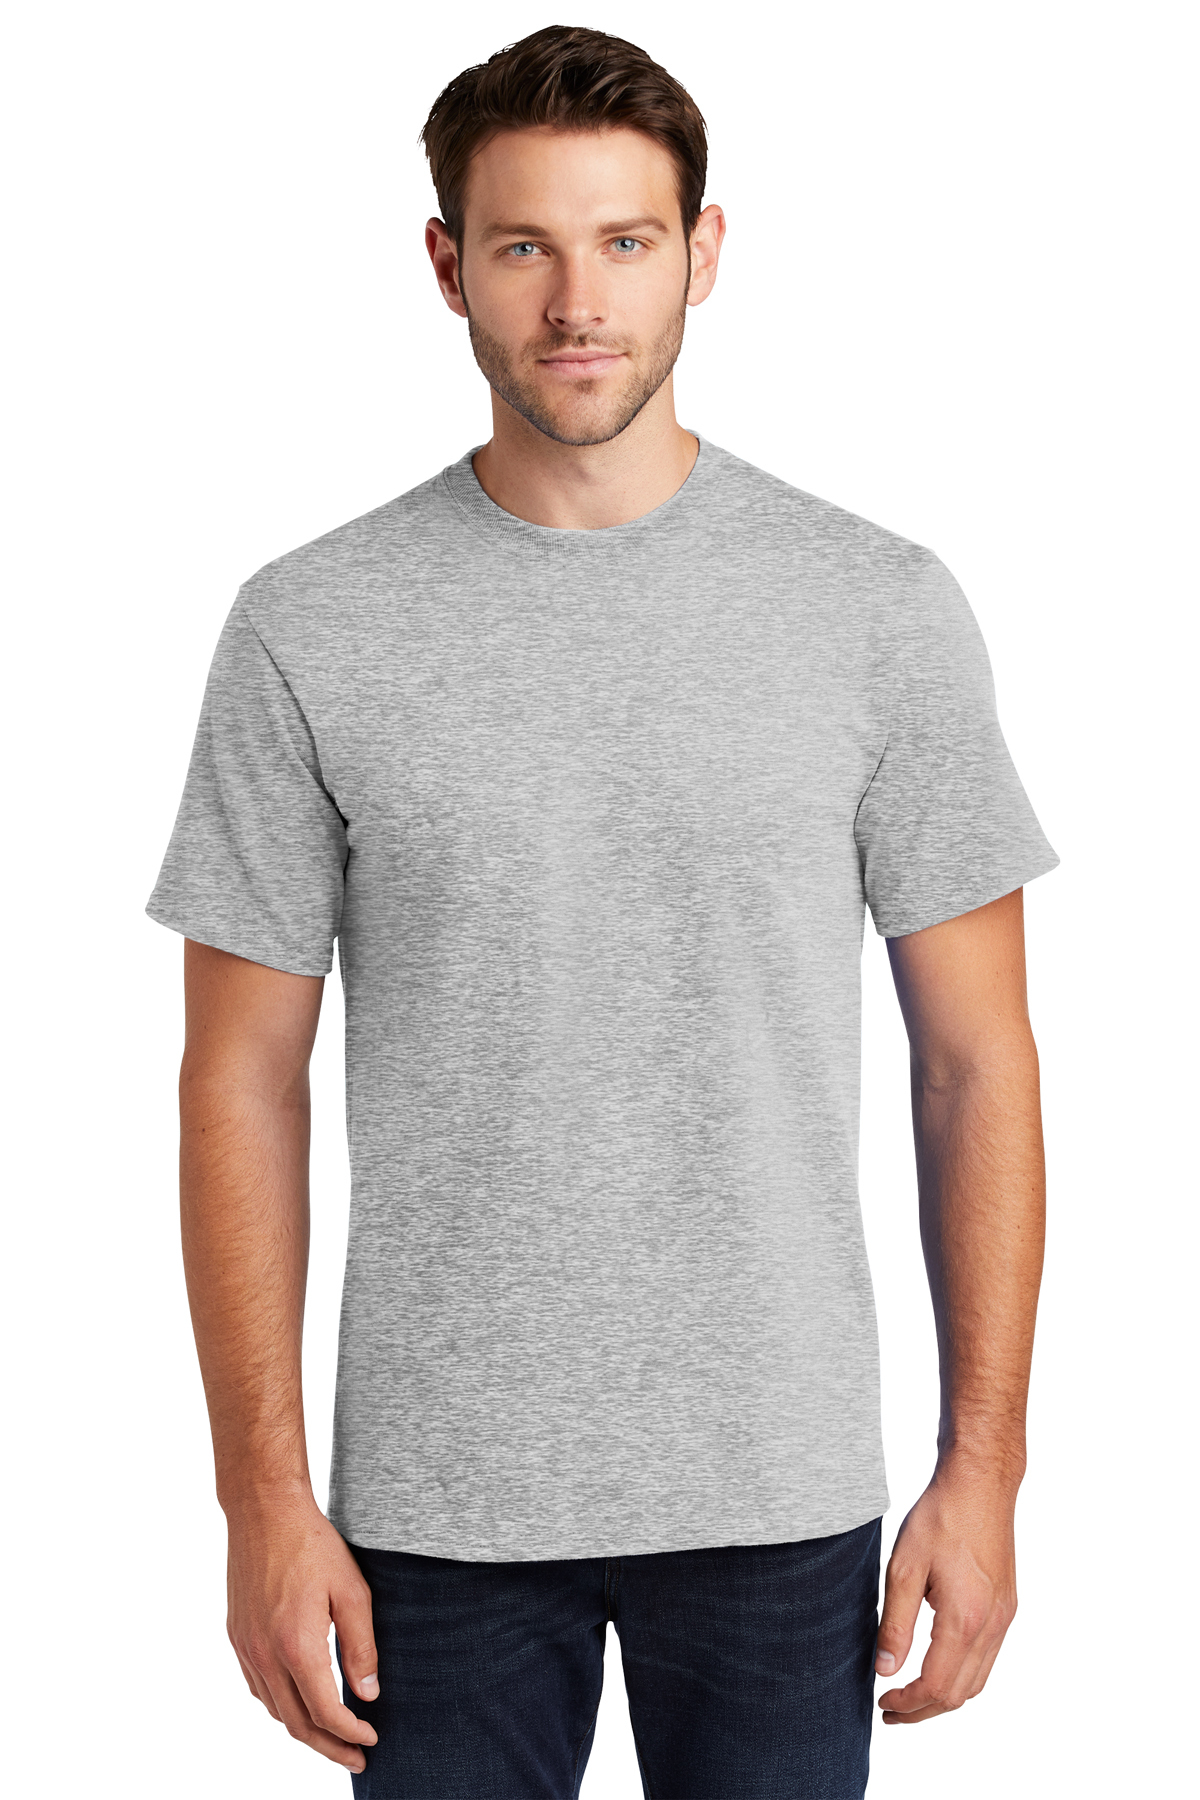 Port & Company Essential Tee | Product | Company Casuals